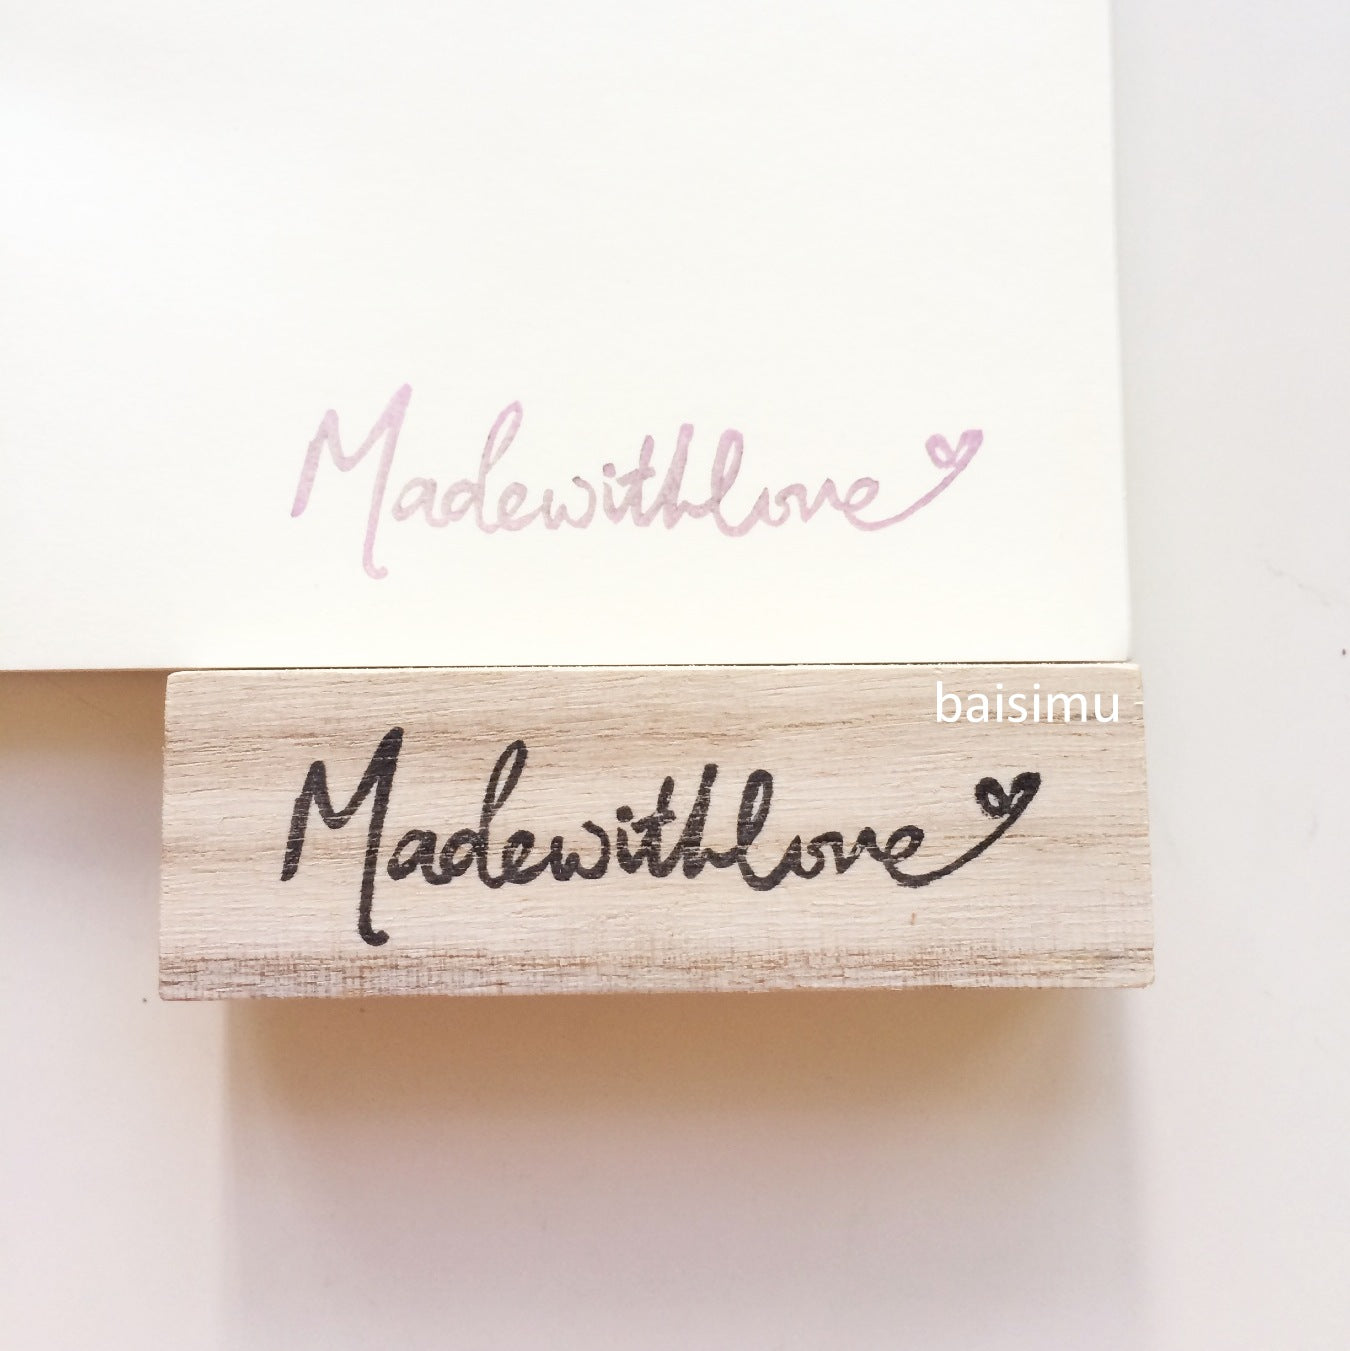 Made with love rubber stamp